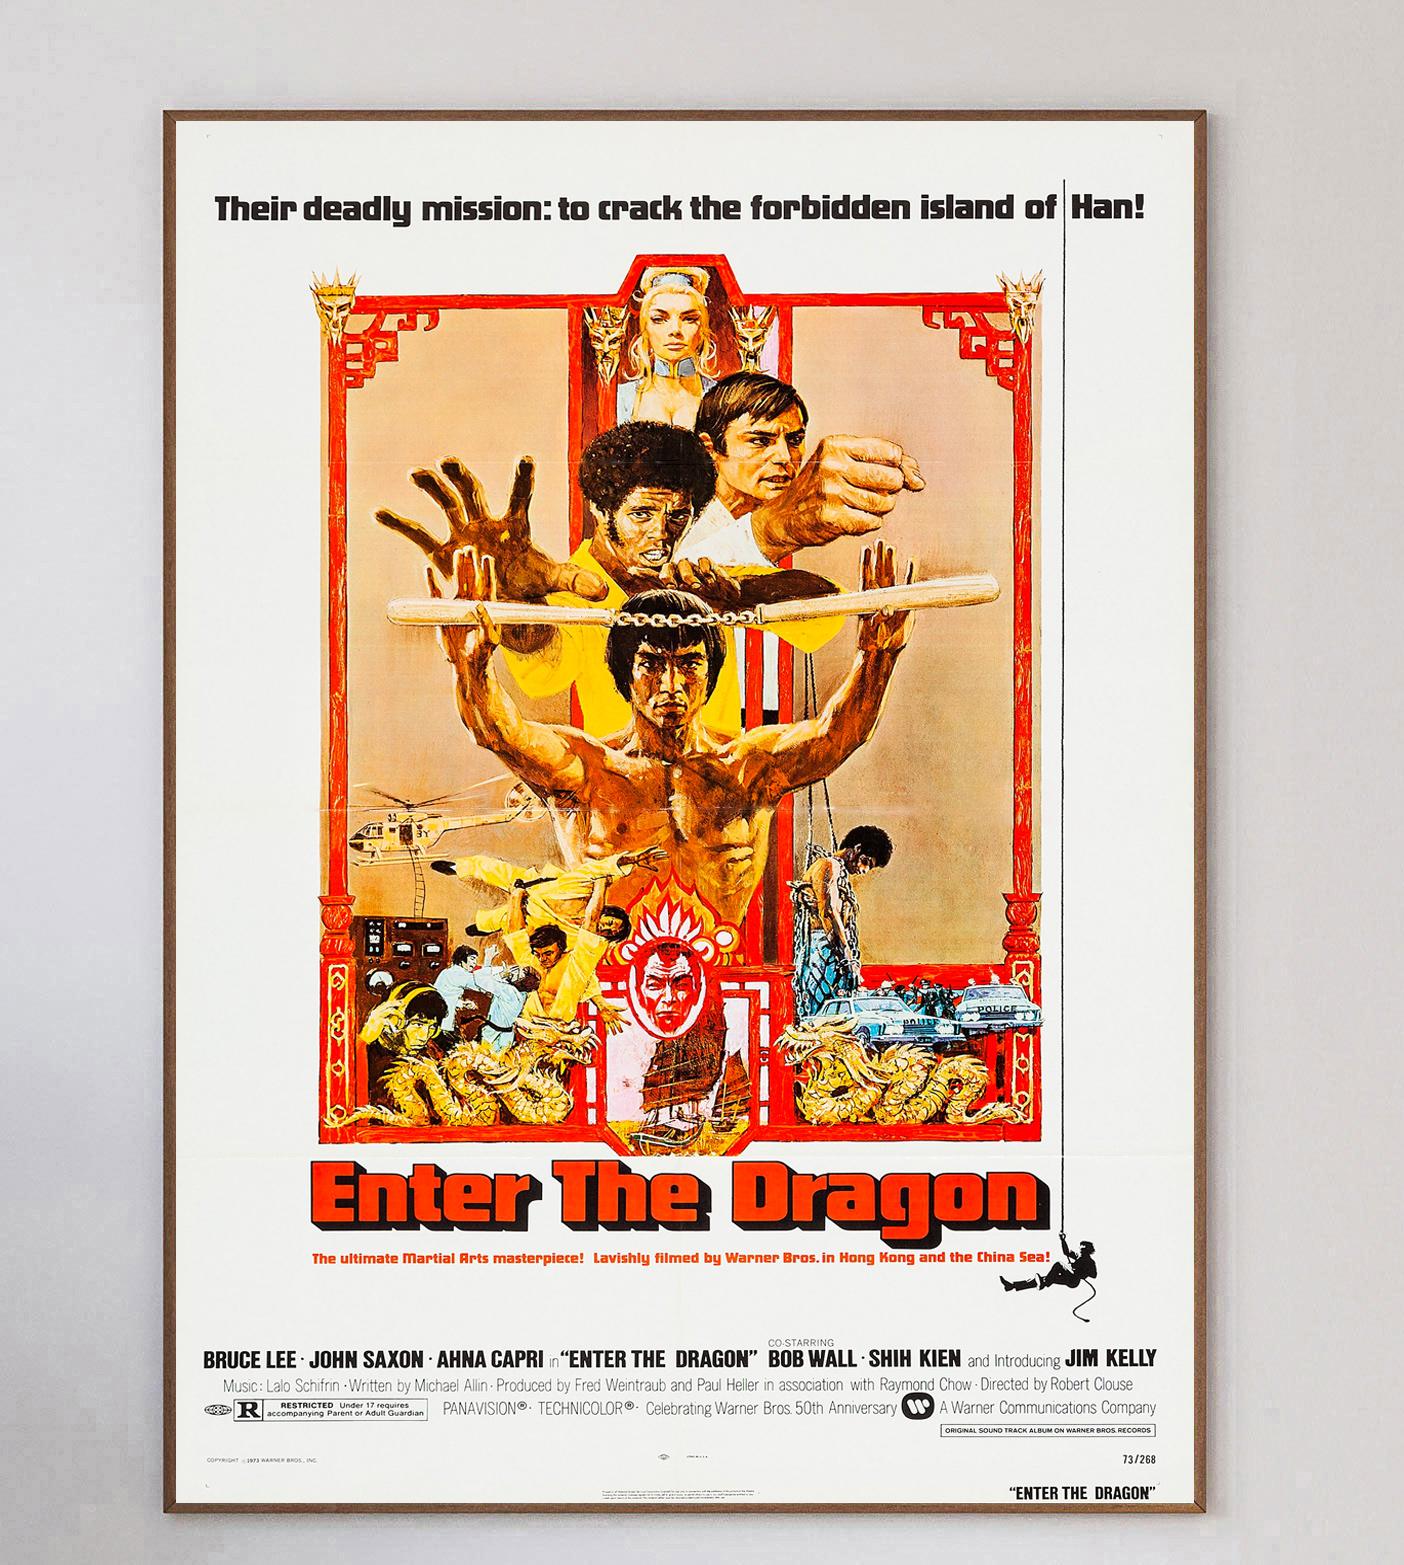 Widely considered one of, if not the greatest martial arts films of all time. Enter the Dragon is a 1973 martial arts film produced by and starring Bruce Lee. The film, which co-stars John Saxon and Jim Kelly, was directed by Robert Clouse. It would